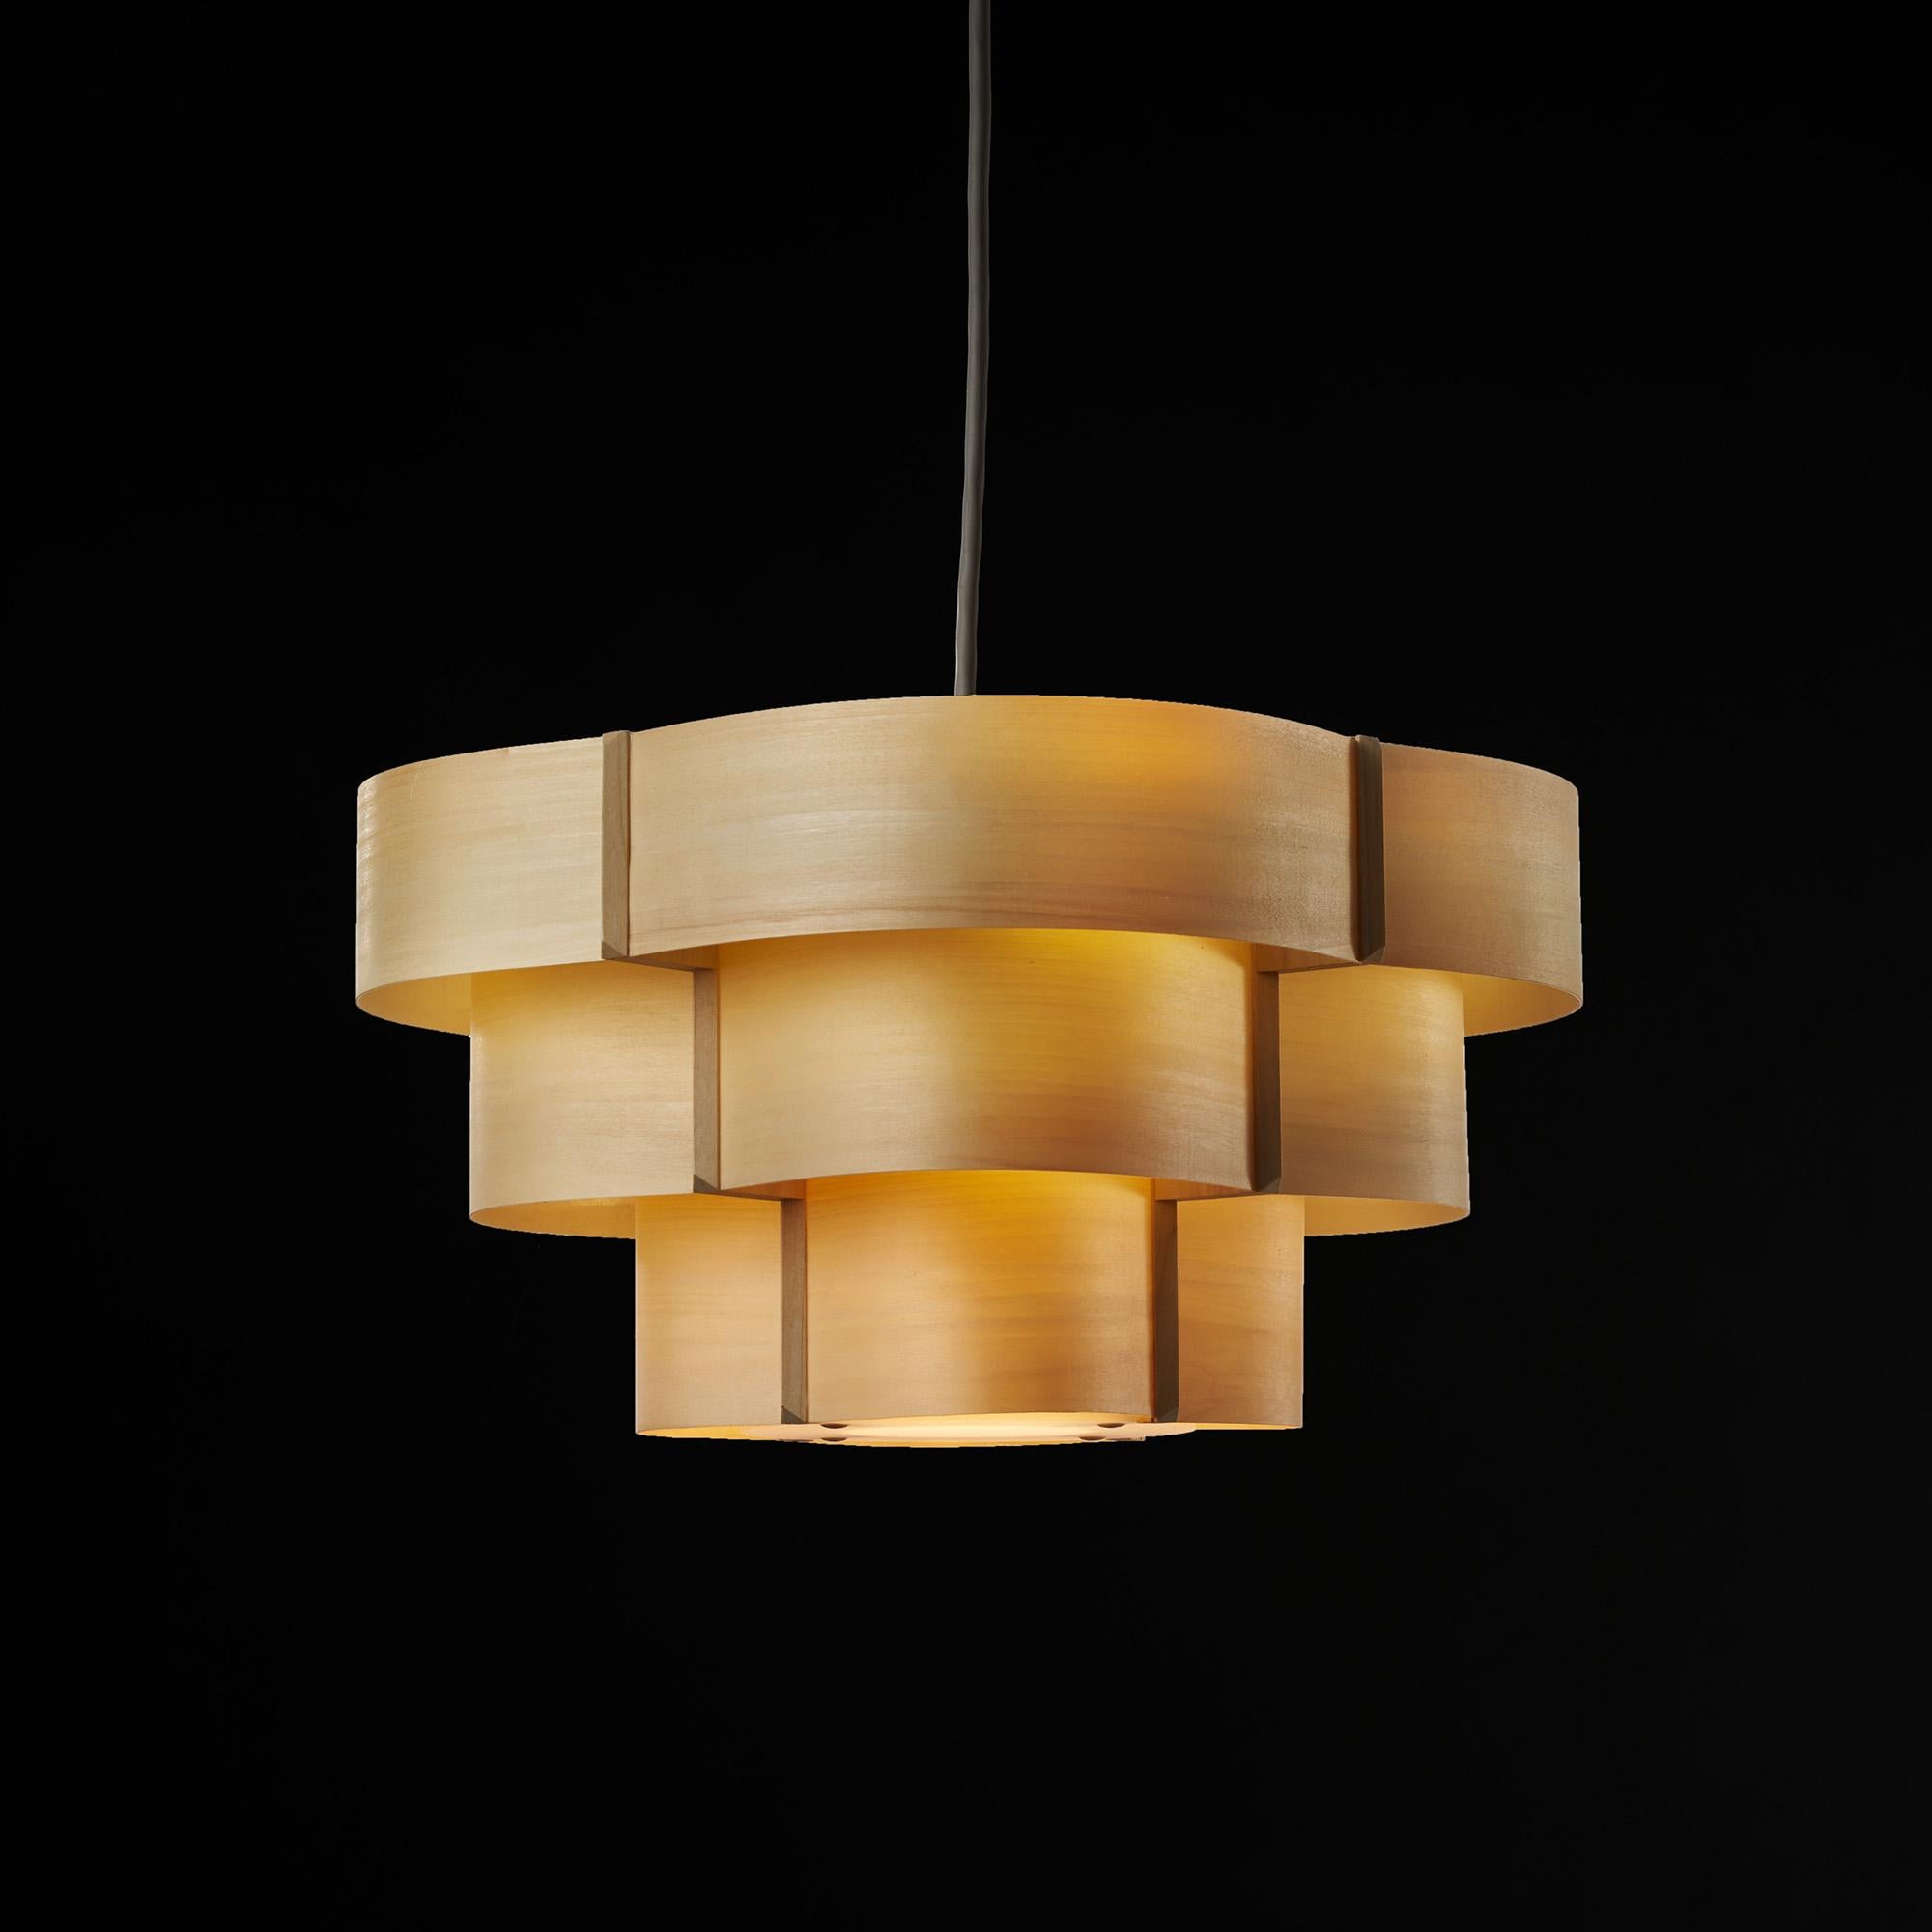 This Scandinavian design is a contemporary pendant in wood veneer with a Danish design style and an organic modern feel. There are many luxury design applications for this pendant, in dining rooms, entryways or conference rooms. 

• Supplied with